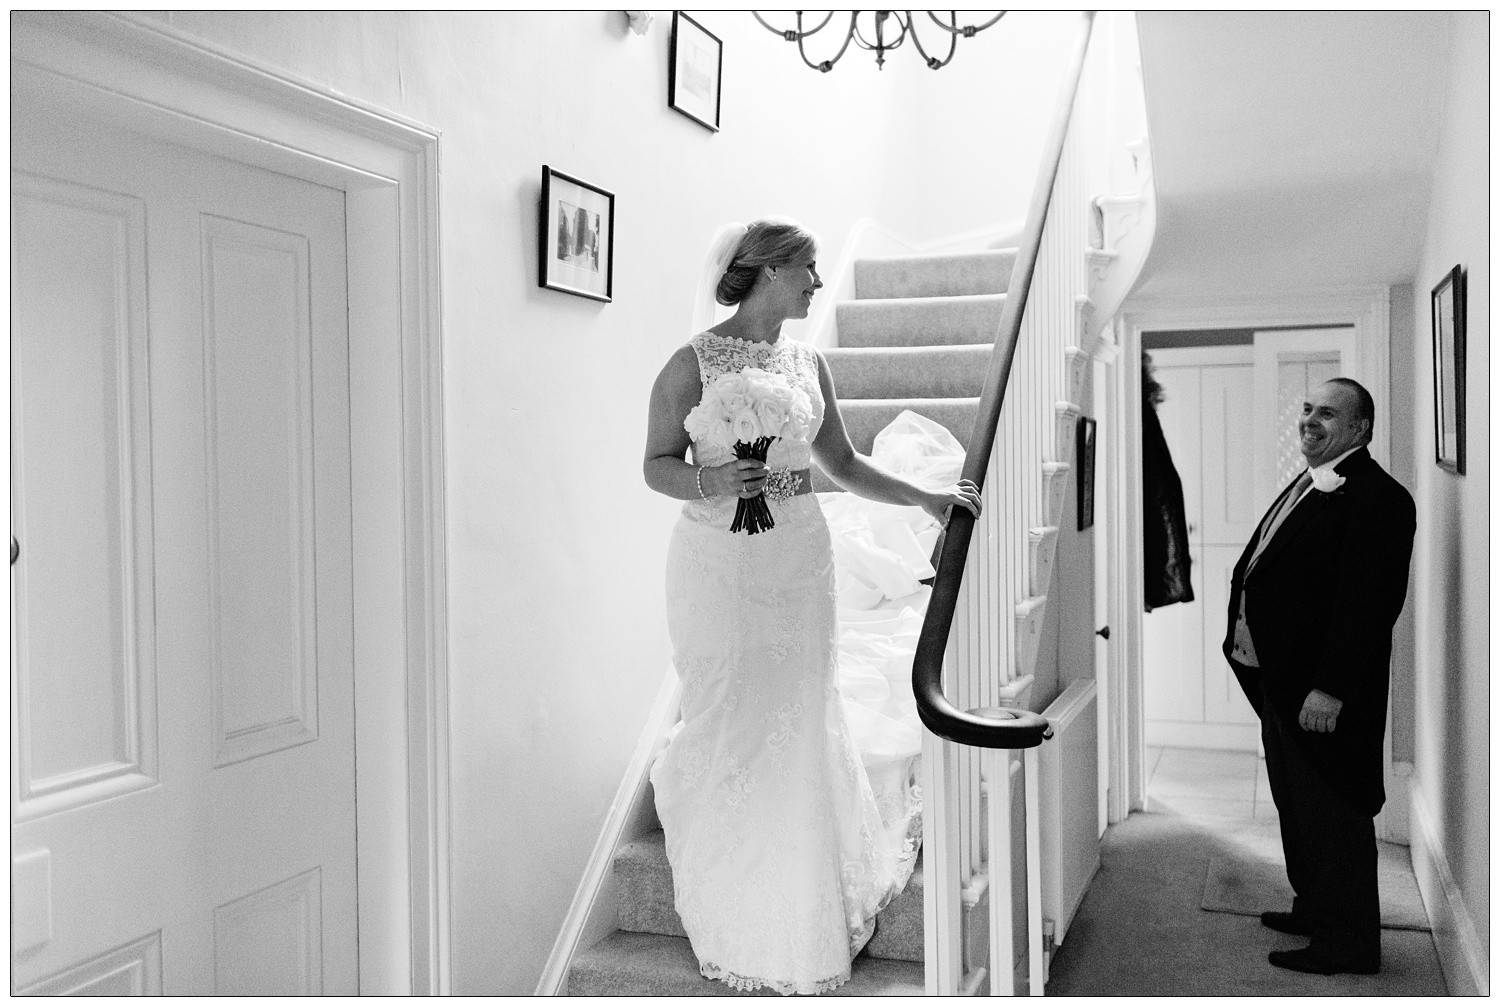 A woman in her wedding dress carrying flowers walks down the stairs of the family home and smiles at her dad.